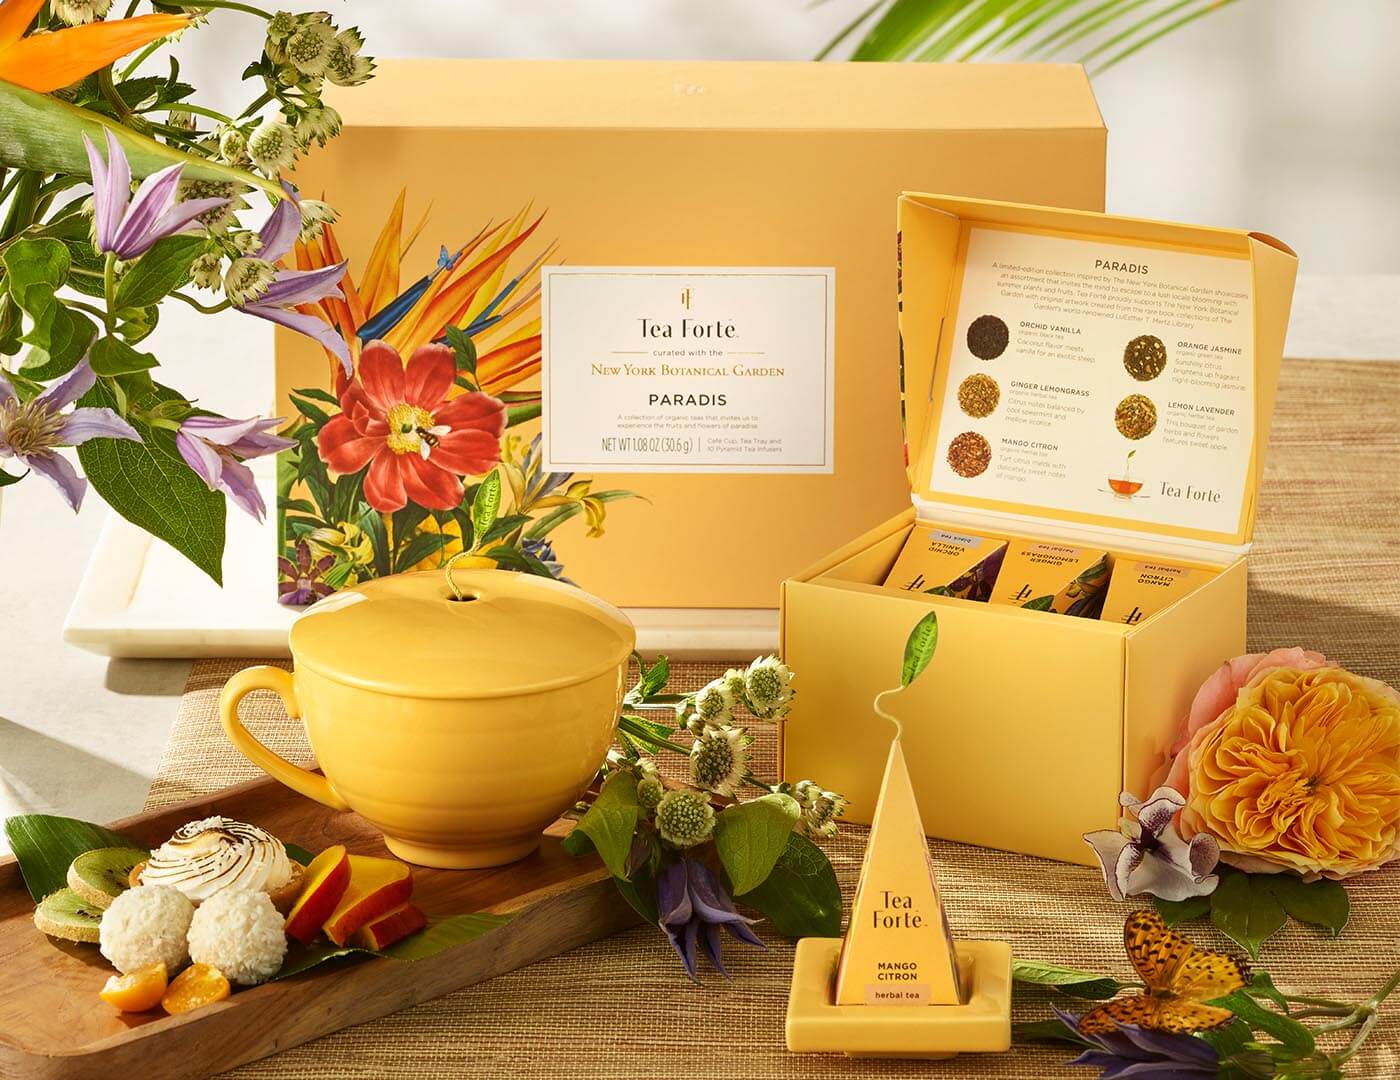 Paradis Gift Set with items shown in front of box and flowers